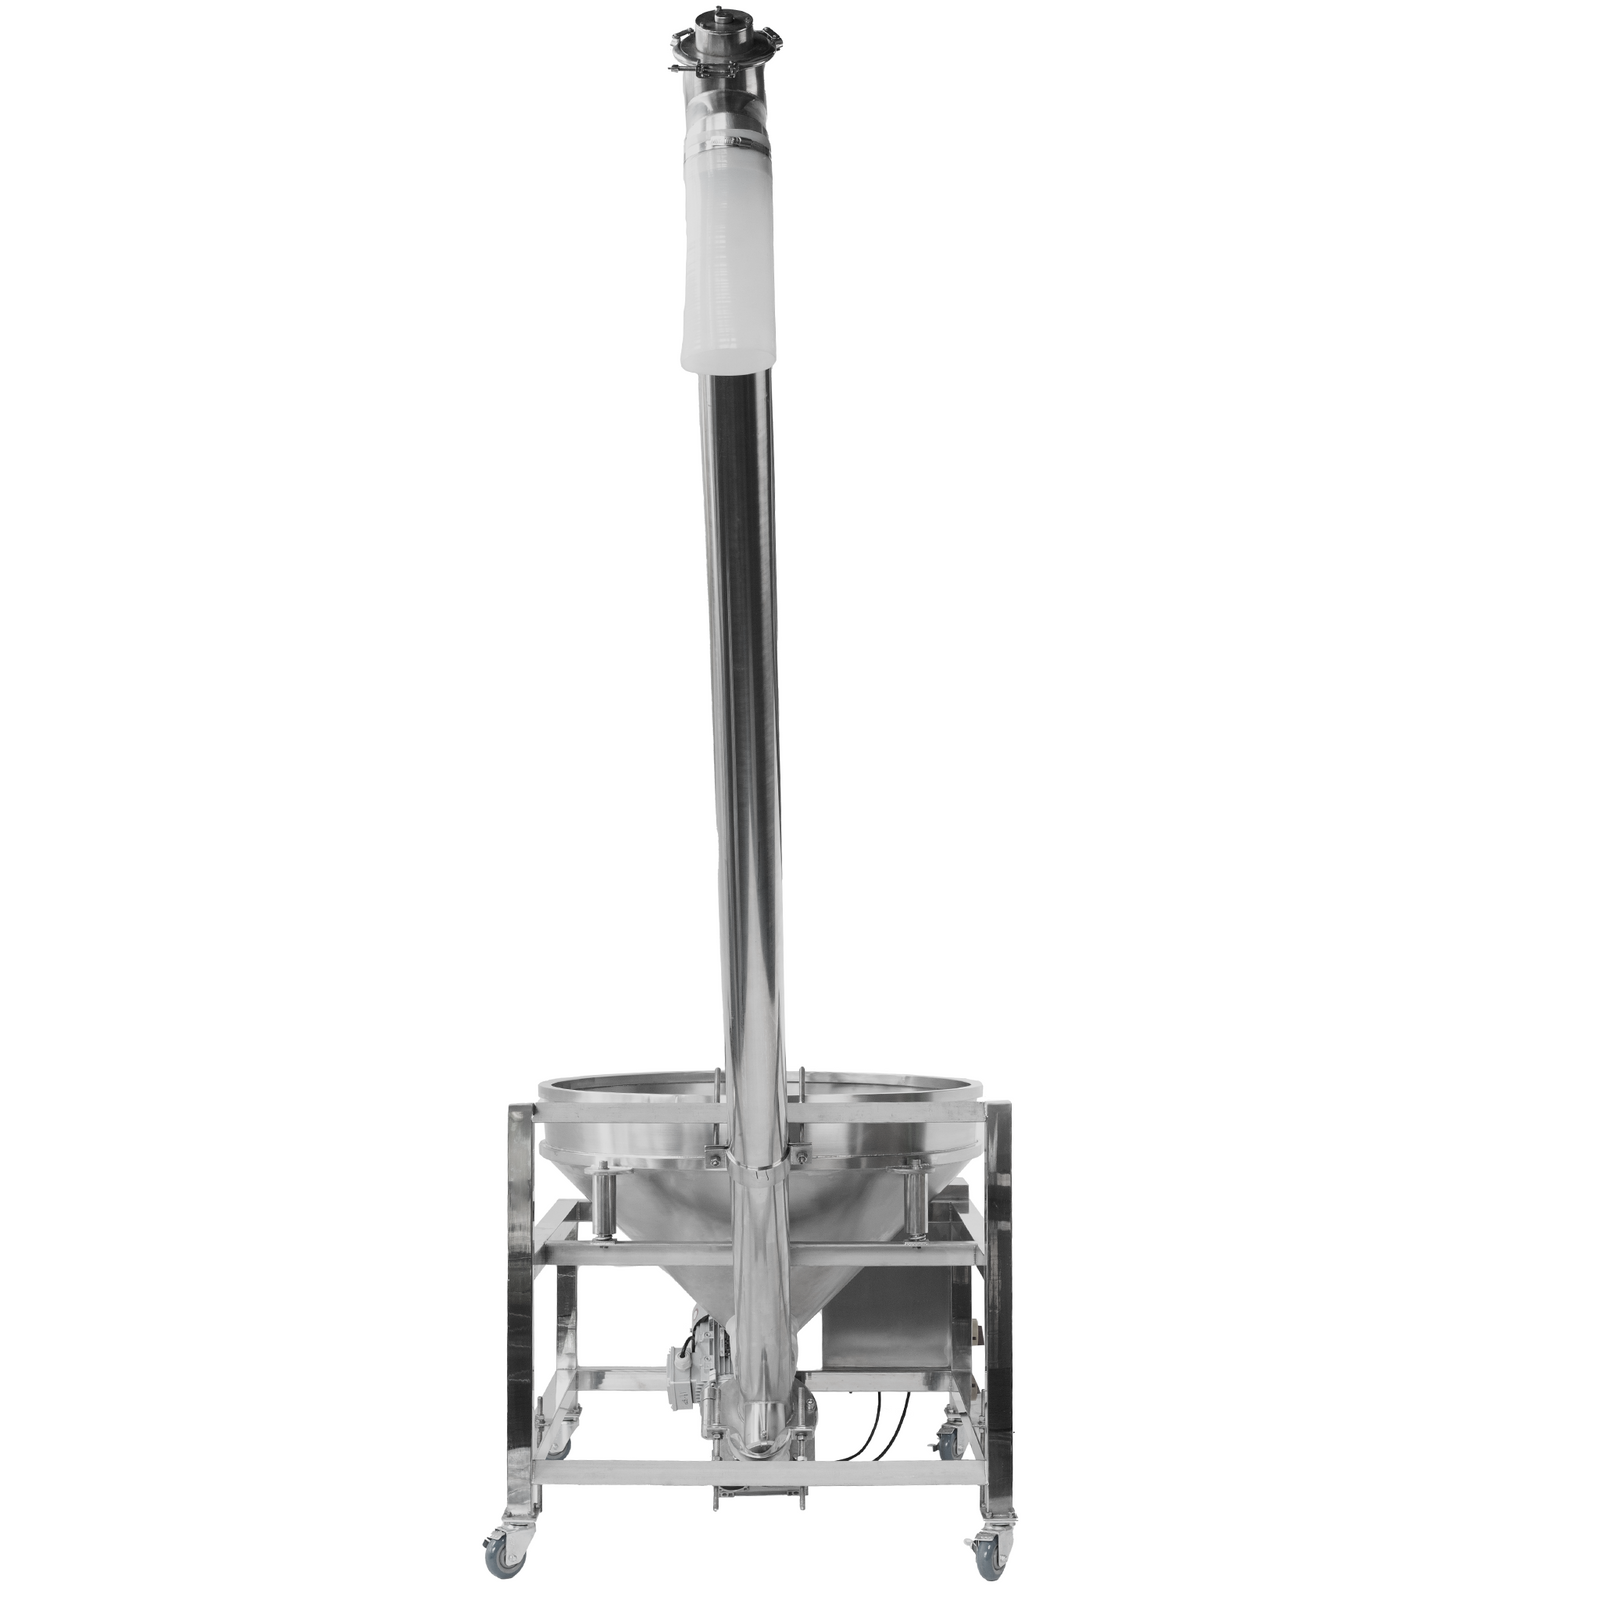 Stainless steel screw elevator or auger feeder for powders by JORES TECHNOLOGIES®